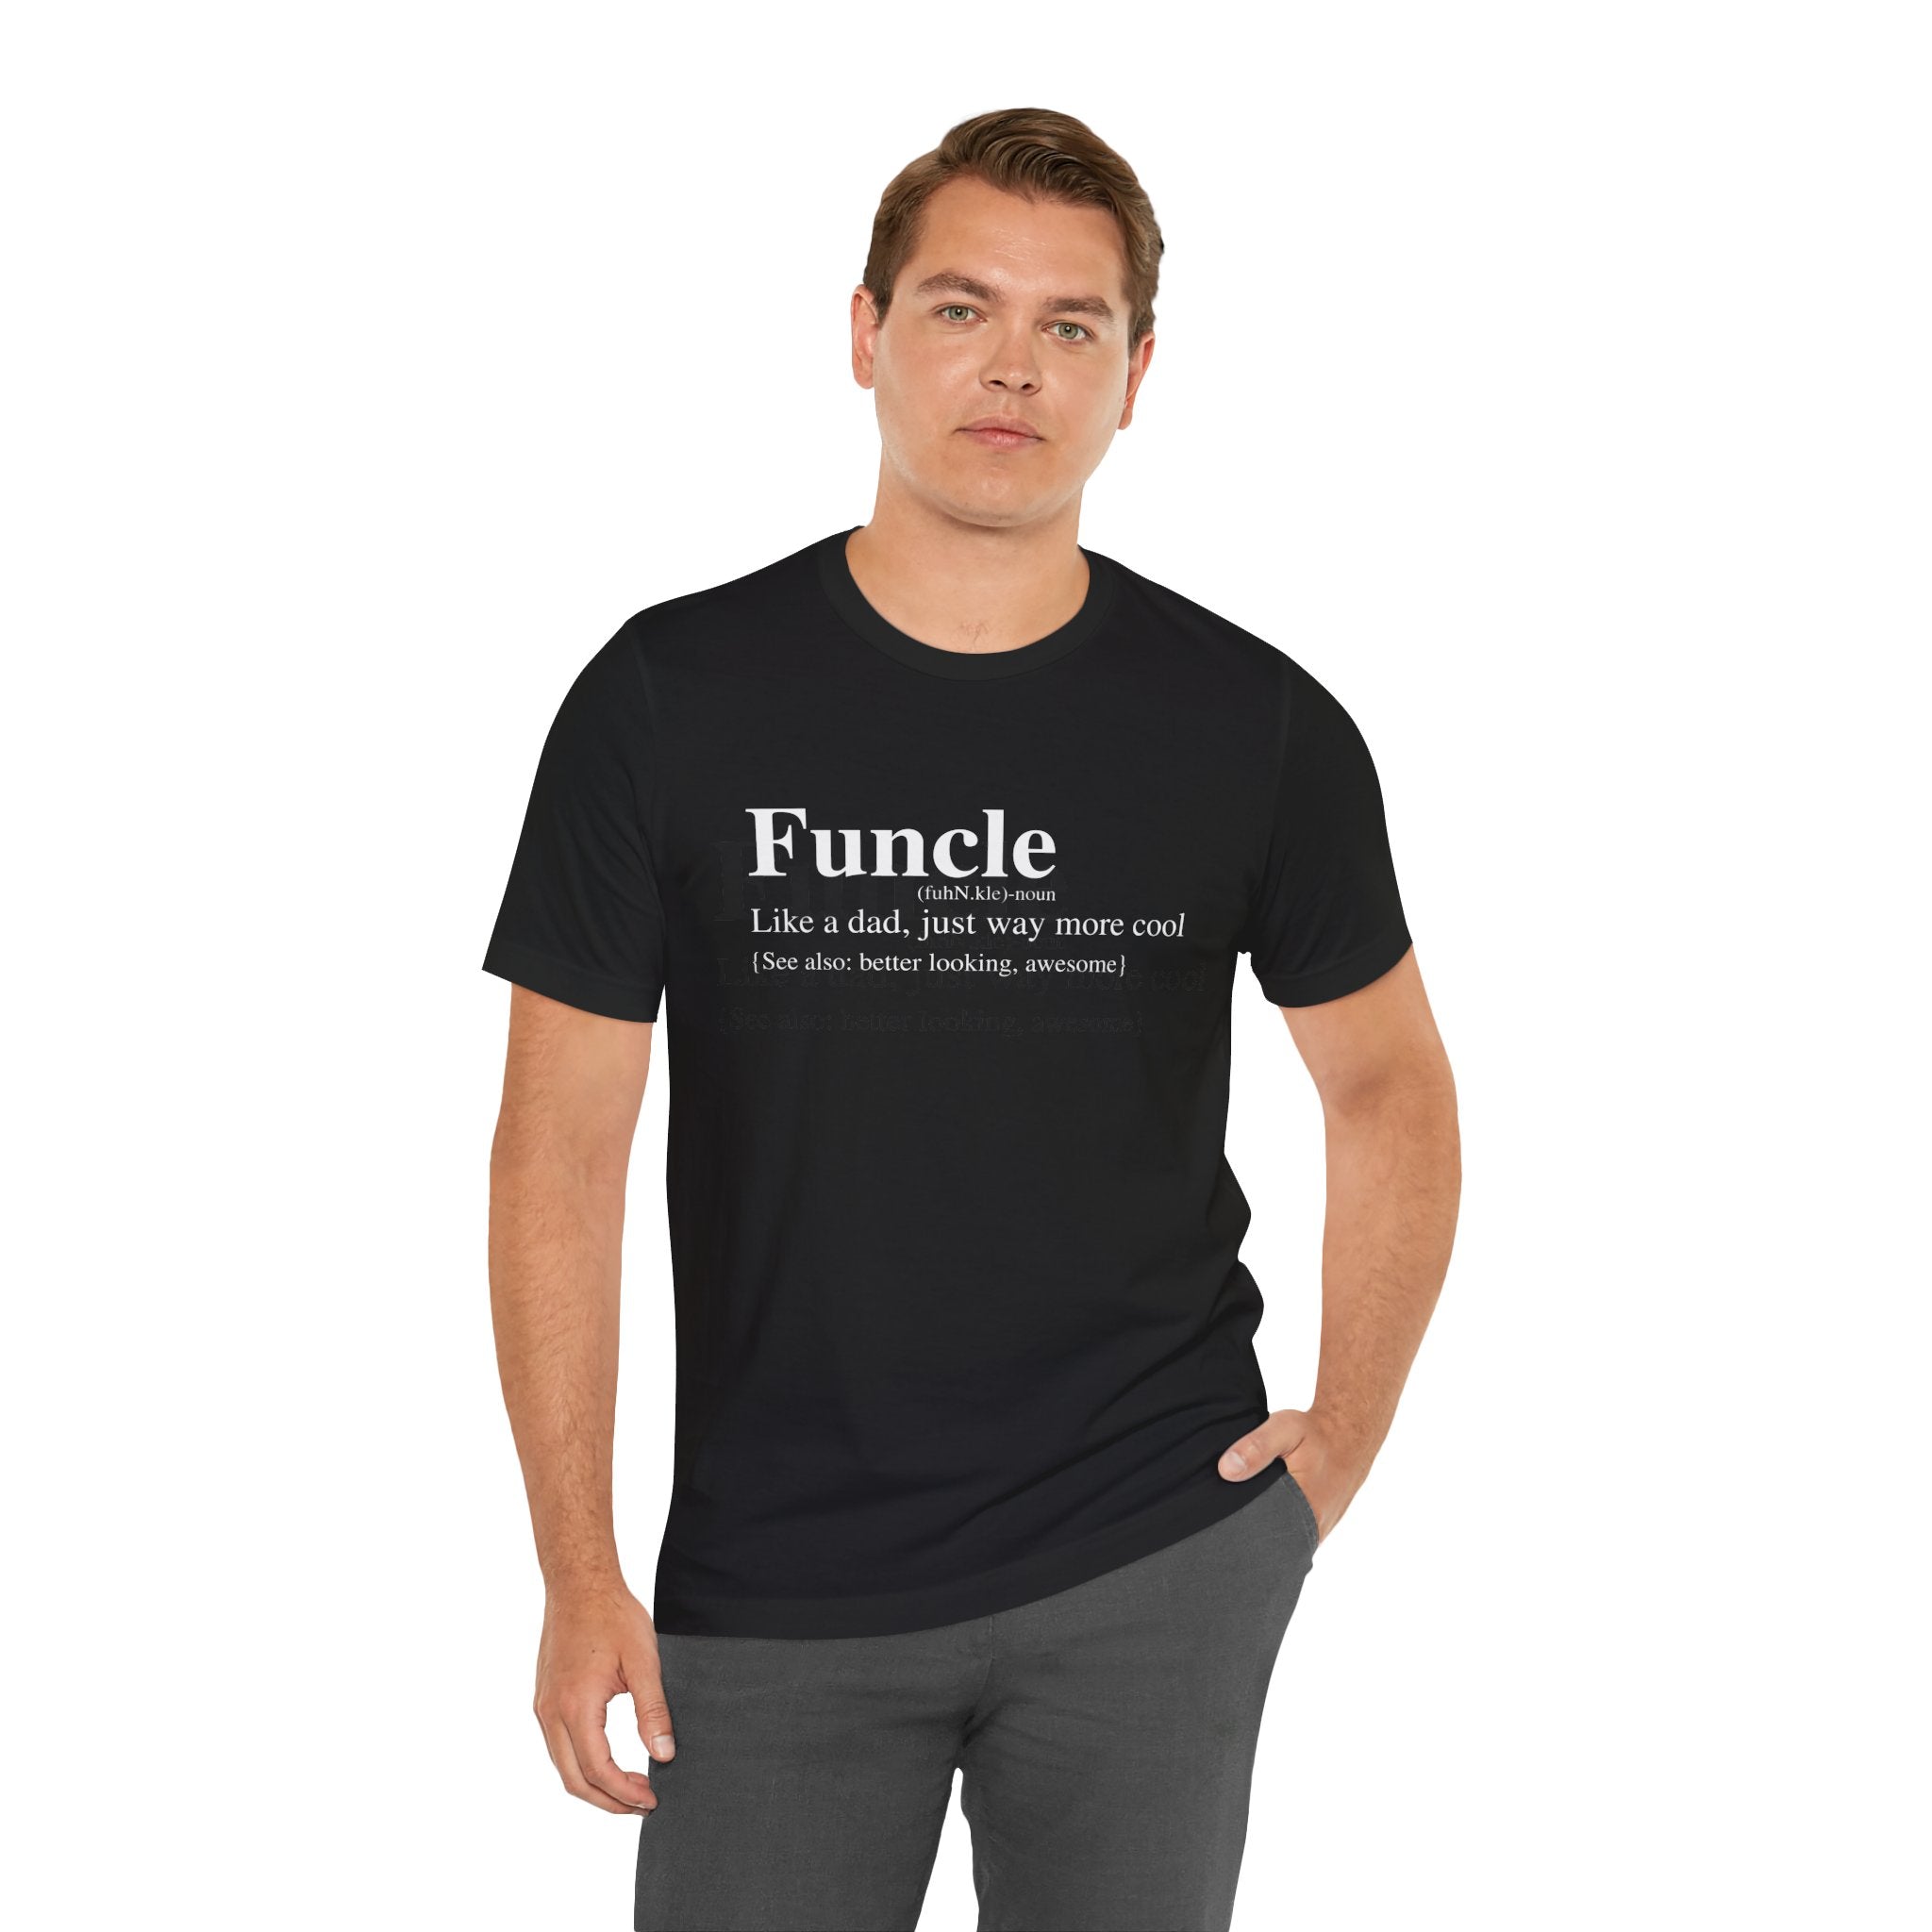 Man in a black "Funcle T-Shirt" with the text "funcle - like a dad, just way more cool (see also: better looking, awesome)" standing against a plain background.